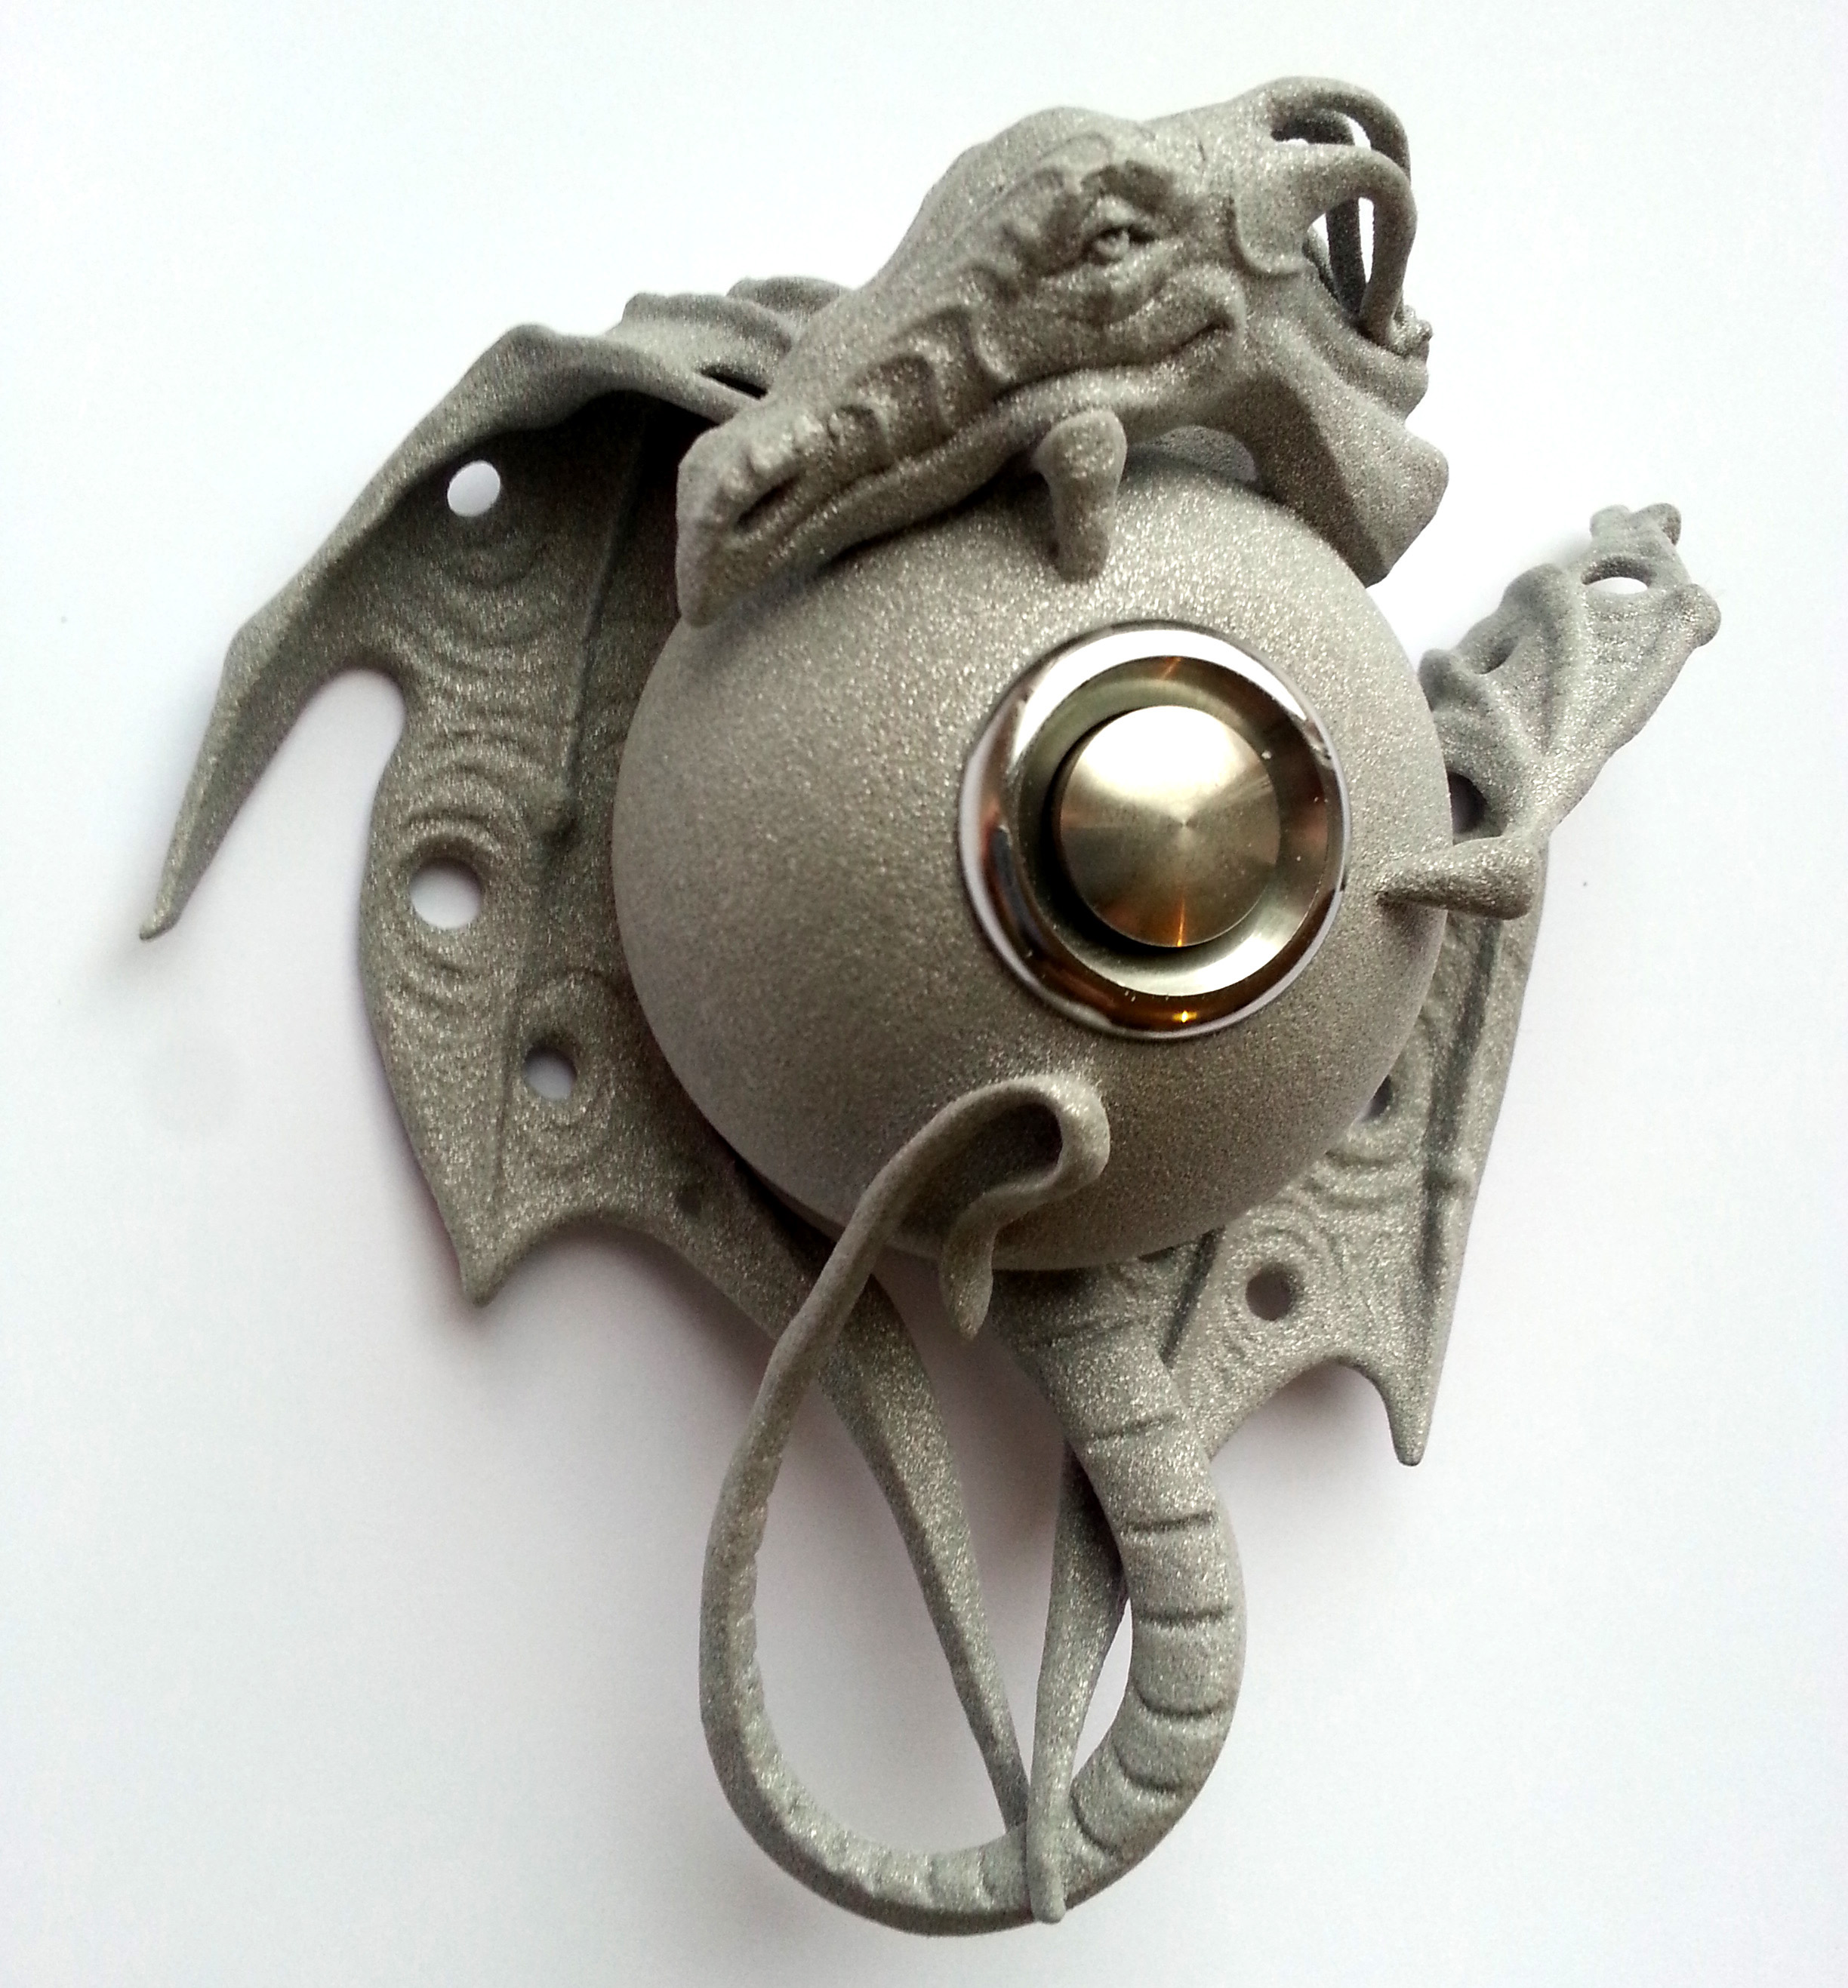  The 3D printed Guardian at the Gate doorbell cover 